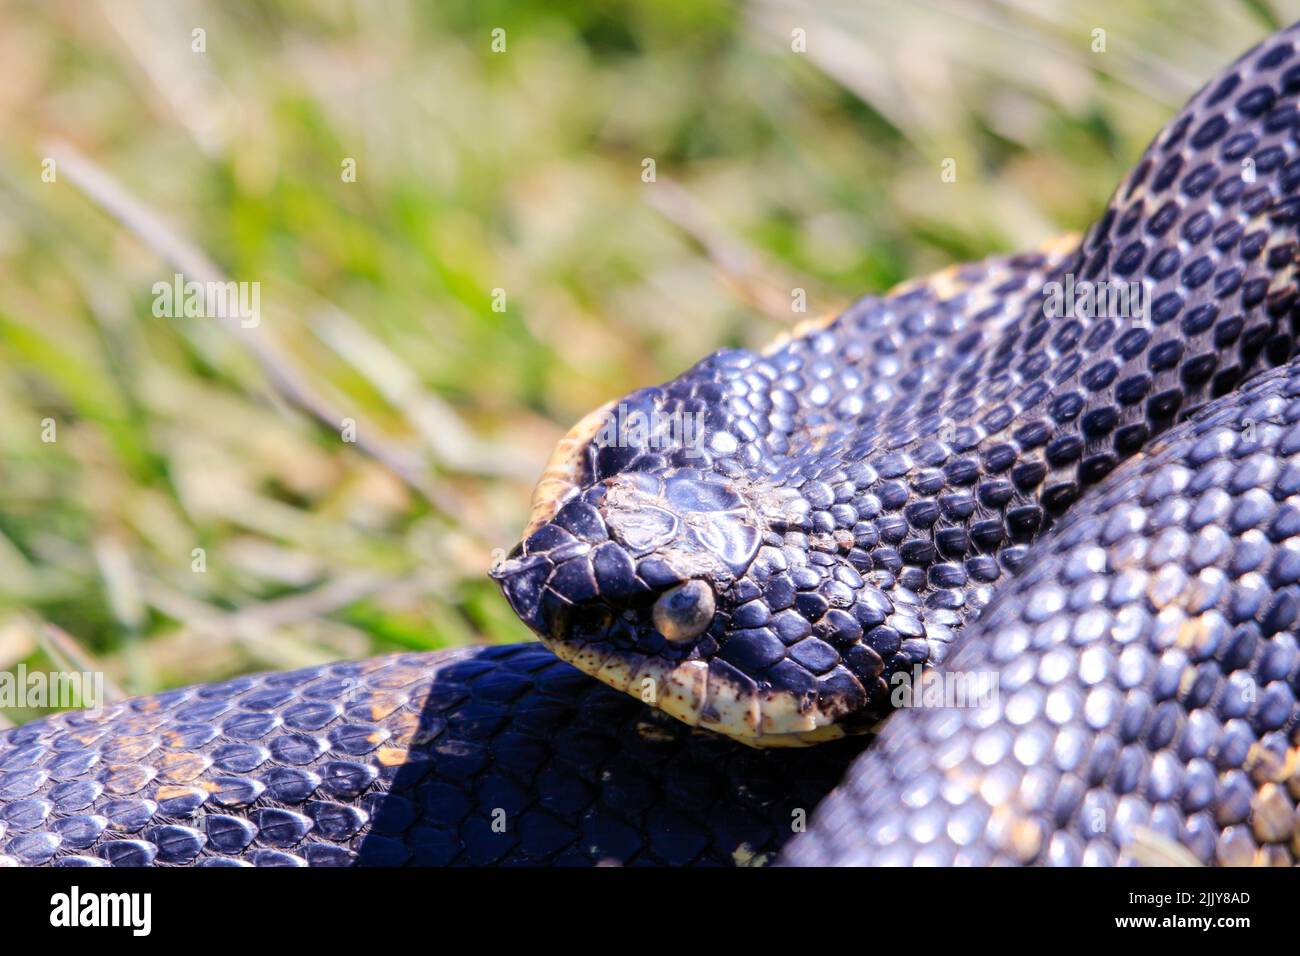 Eastern Hognose Snake with flattened neck on sandy soil with grass Stock Photo